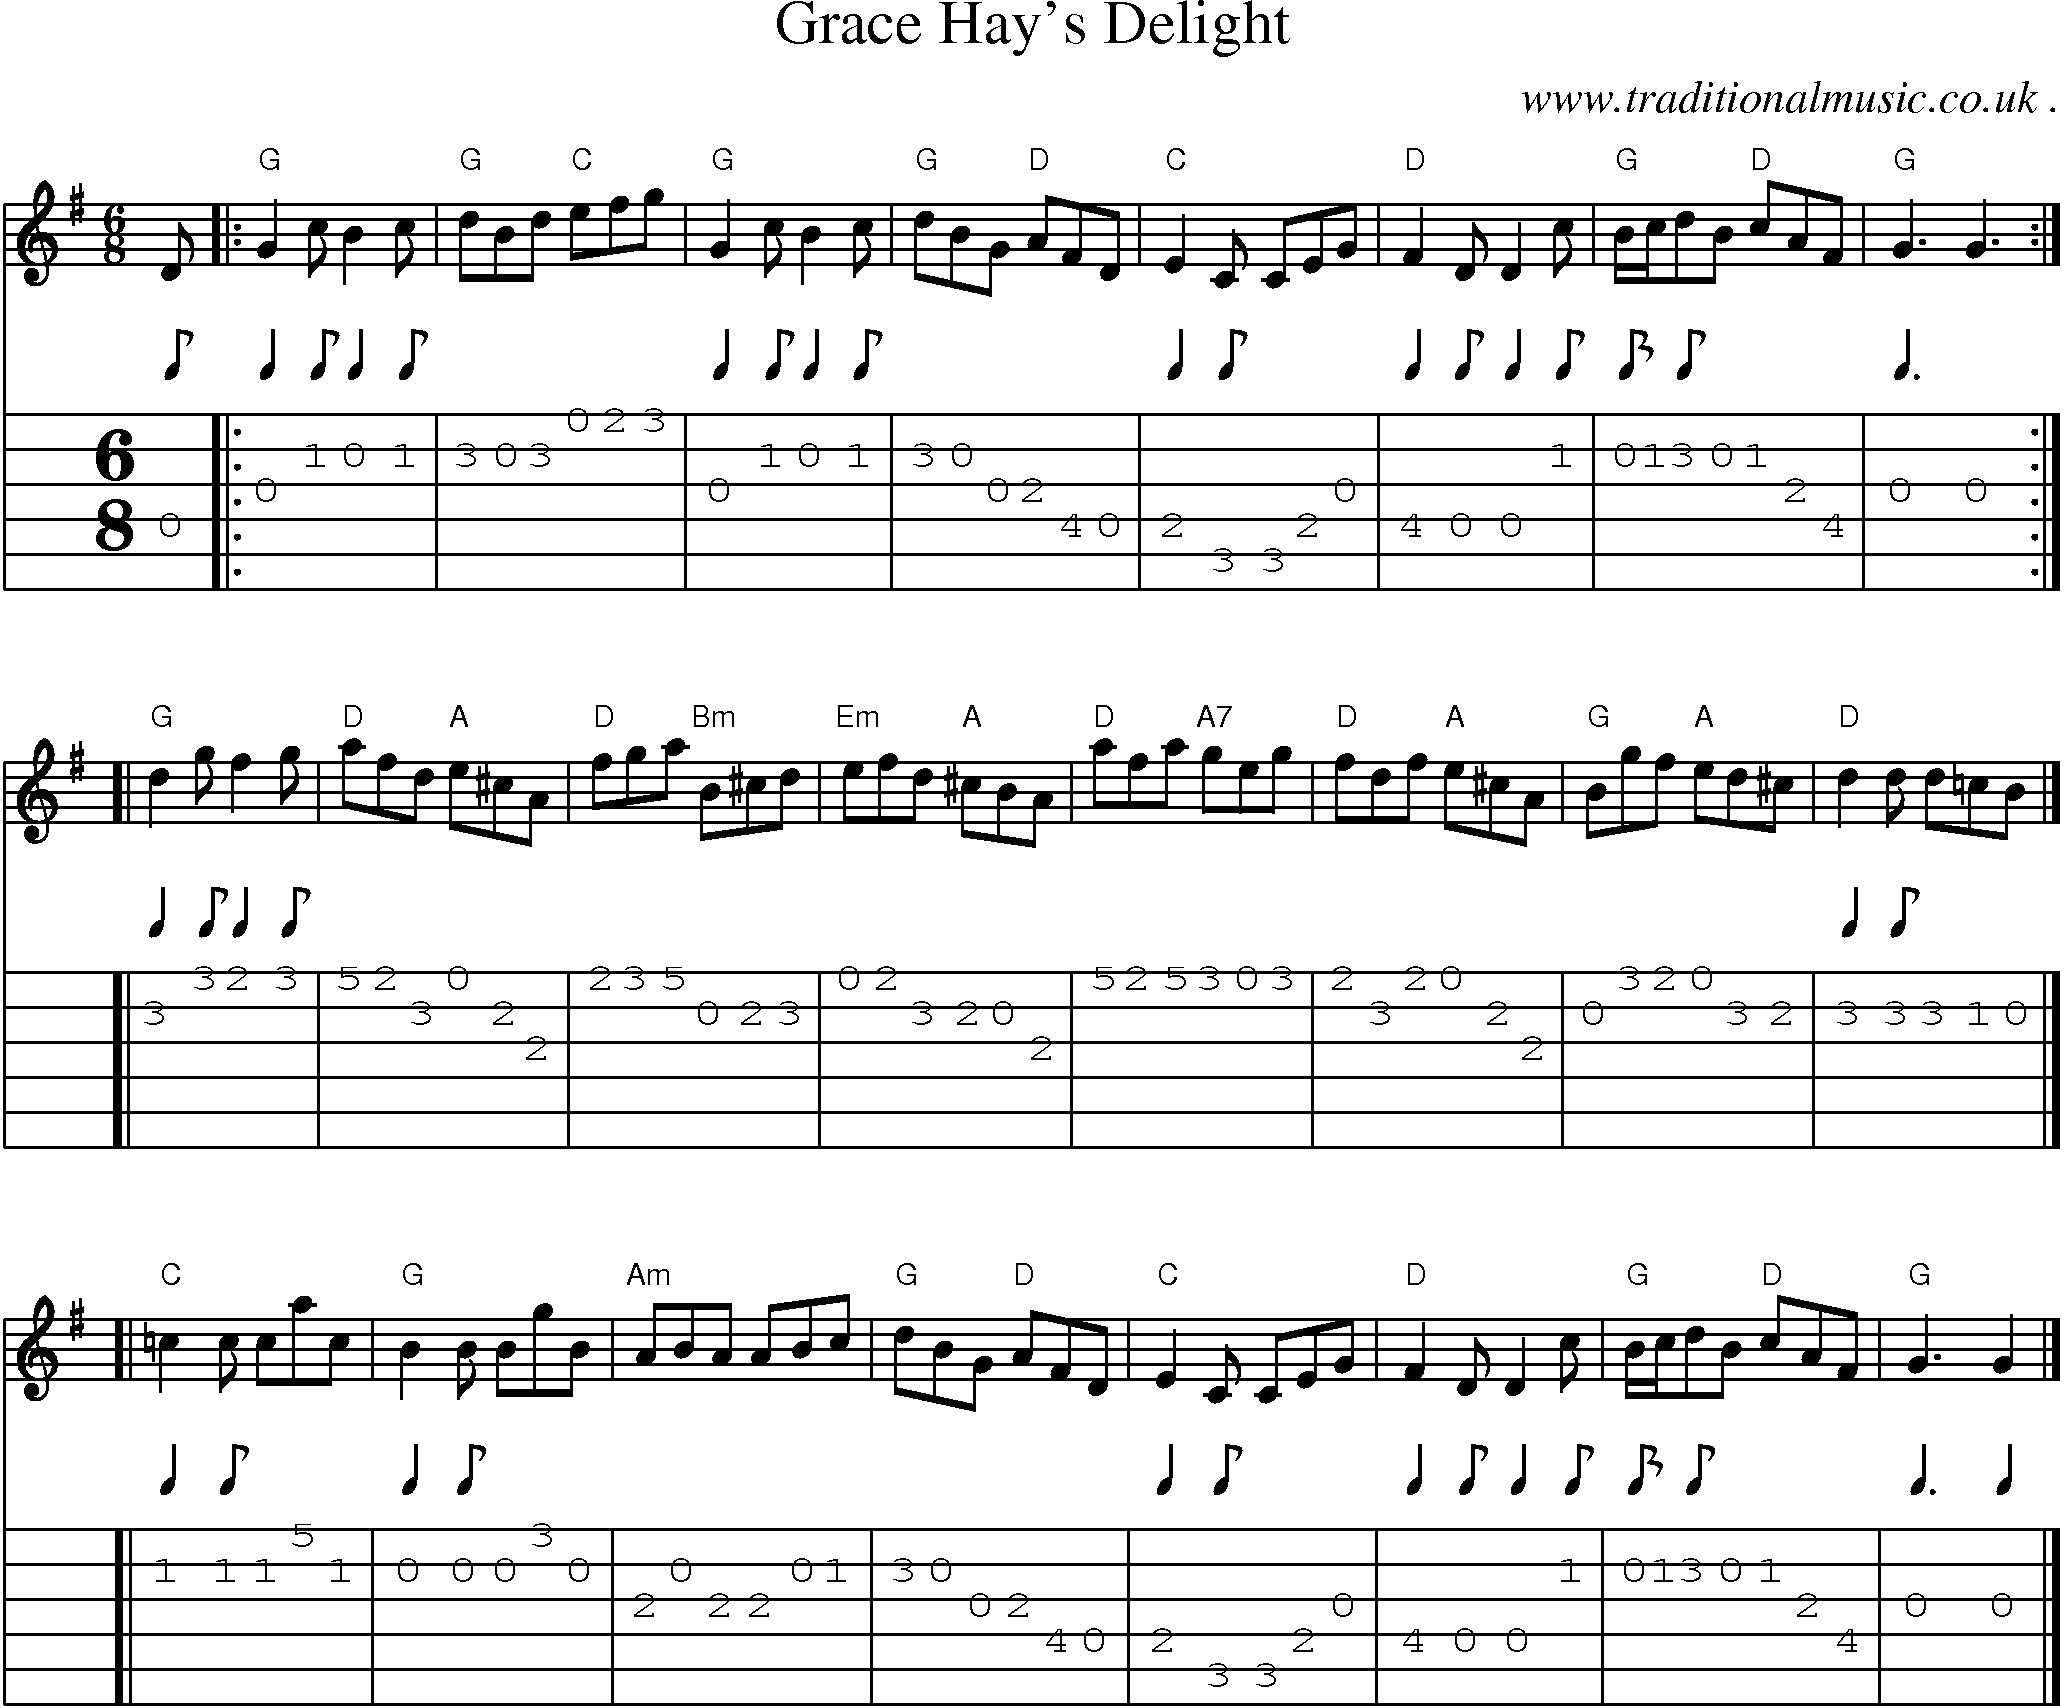 Sheet-music  score, Chords and Guitar Tabs for Grace Hays Delight